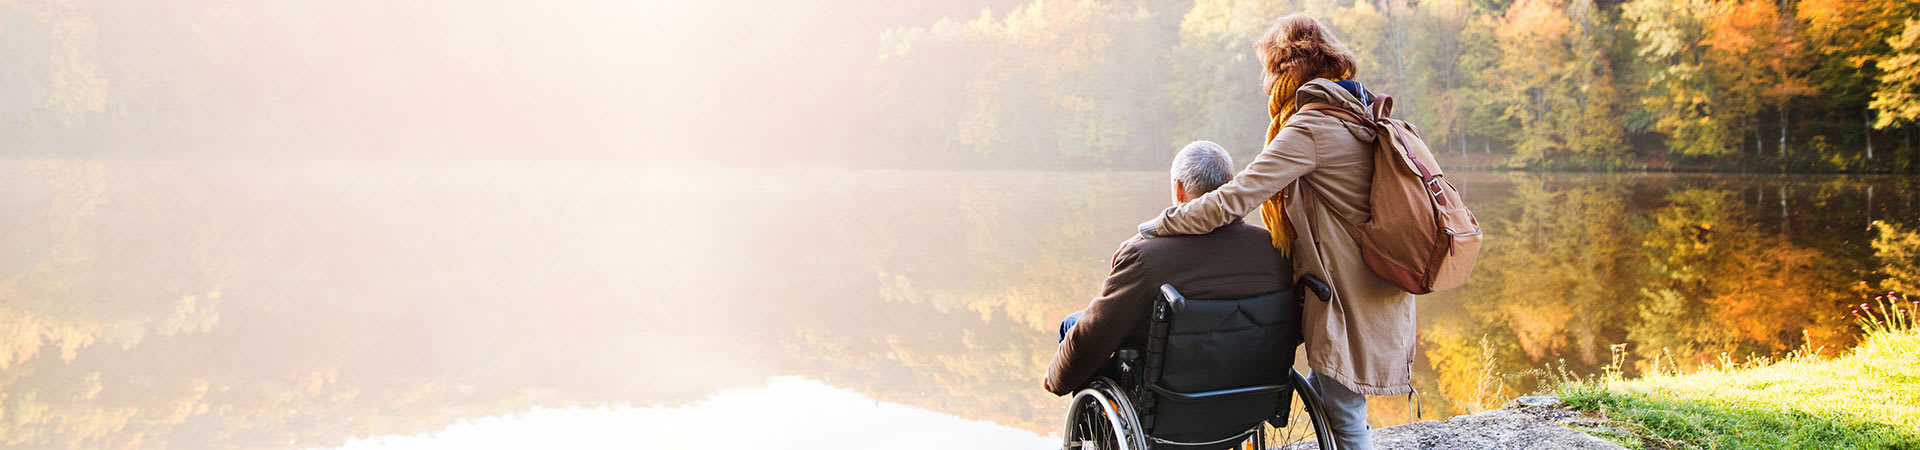 A view from behind of a woman with her arm around a senior man in a wheelchair while looking out at a serene pond